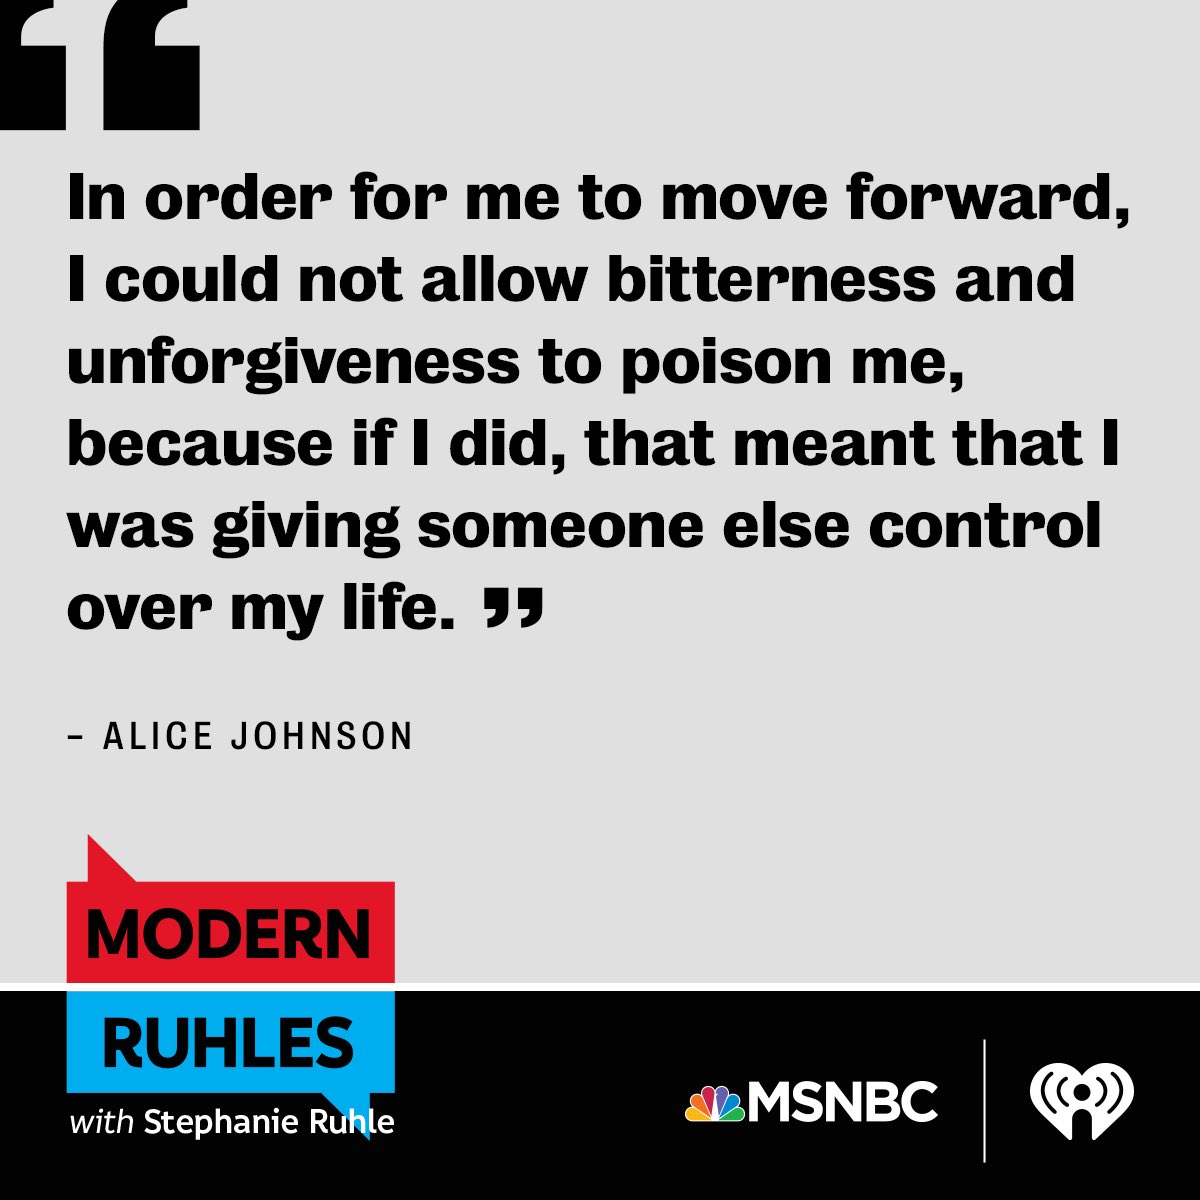 This week on #ModernRuhles: forgiveness. Some say it’s is a road you take – not a line you cross. But sometimes, the path to forgiveness is not so easy. Check out my conversation with @SRuhle wherever you get your podcasts.               podcasts.apple.com/us/podcast/mod…